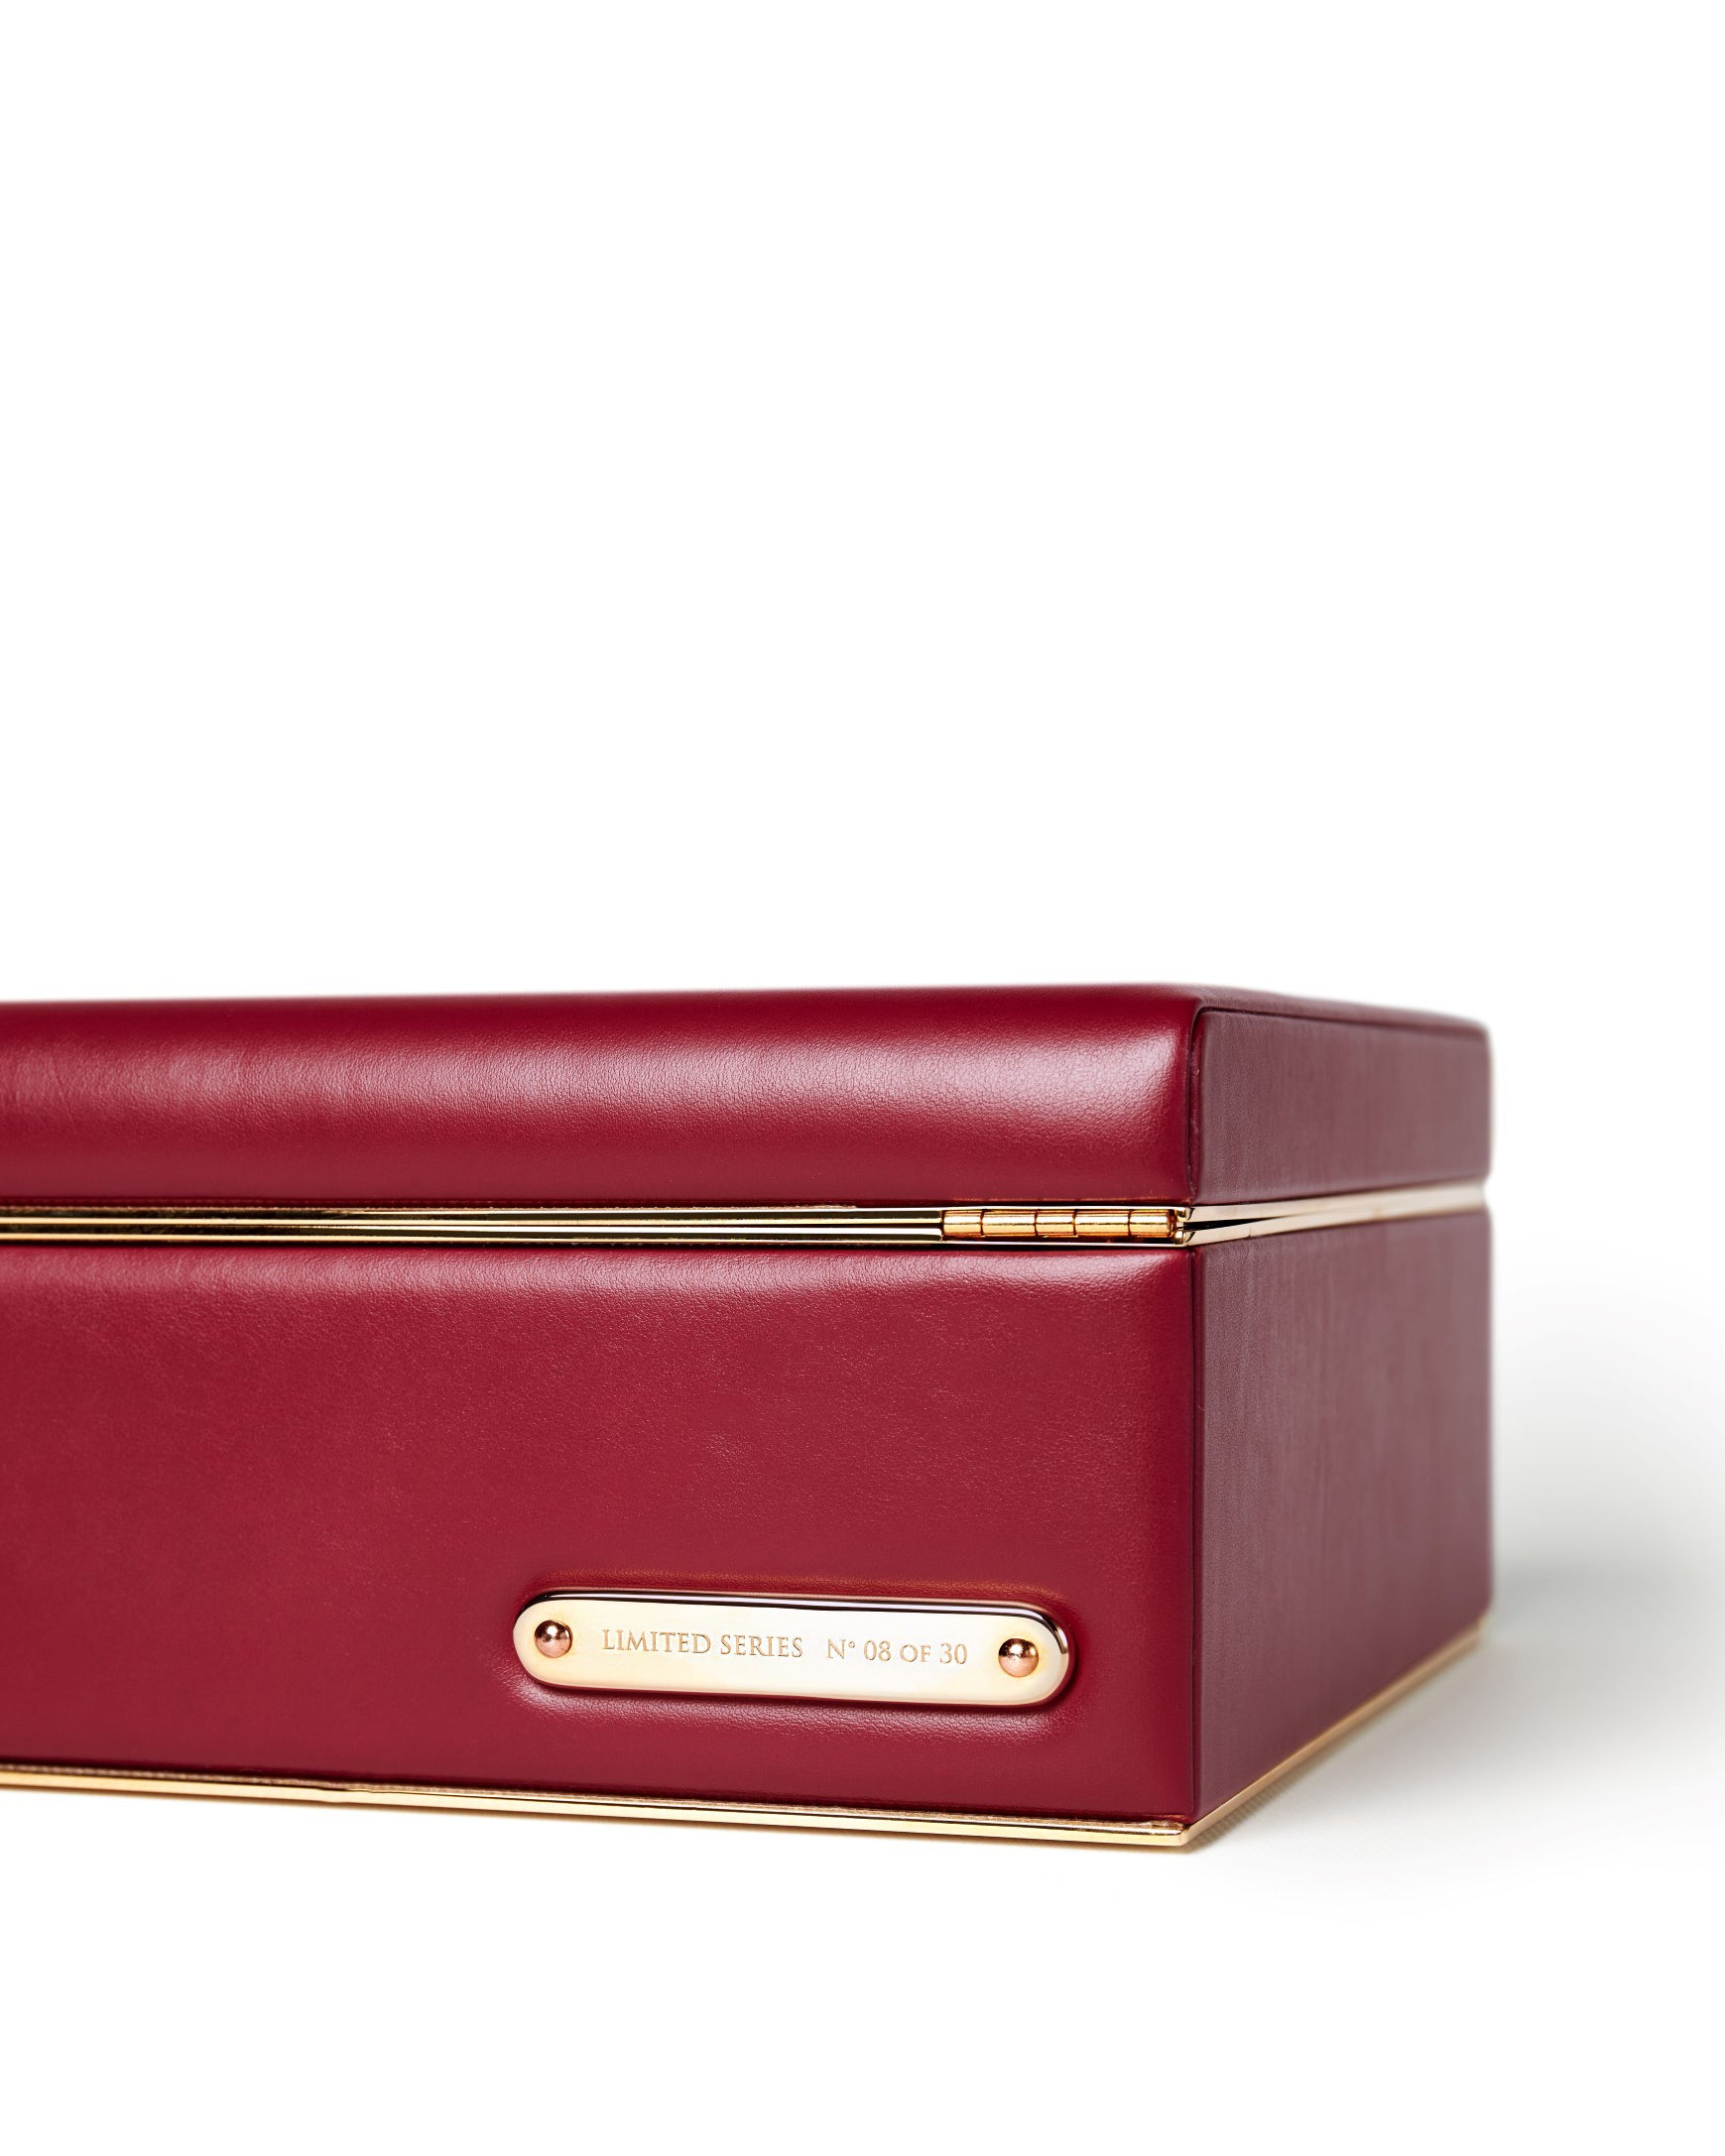 Bernardini Milano jewellery holder of red leather, yellow gold plated and silk - limited series target detail 